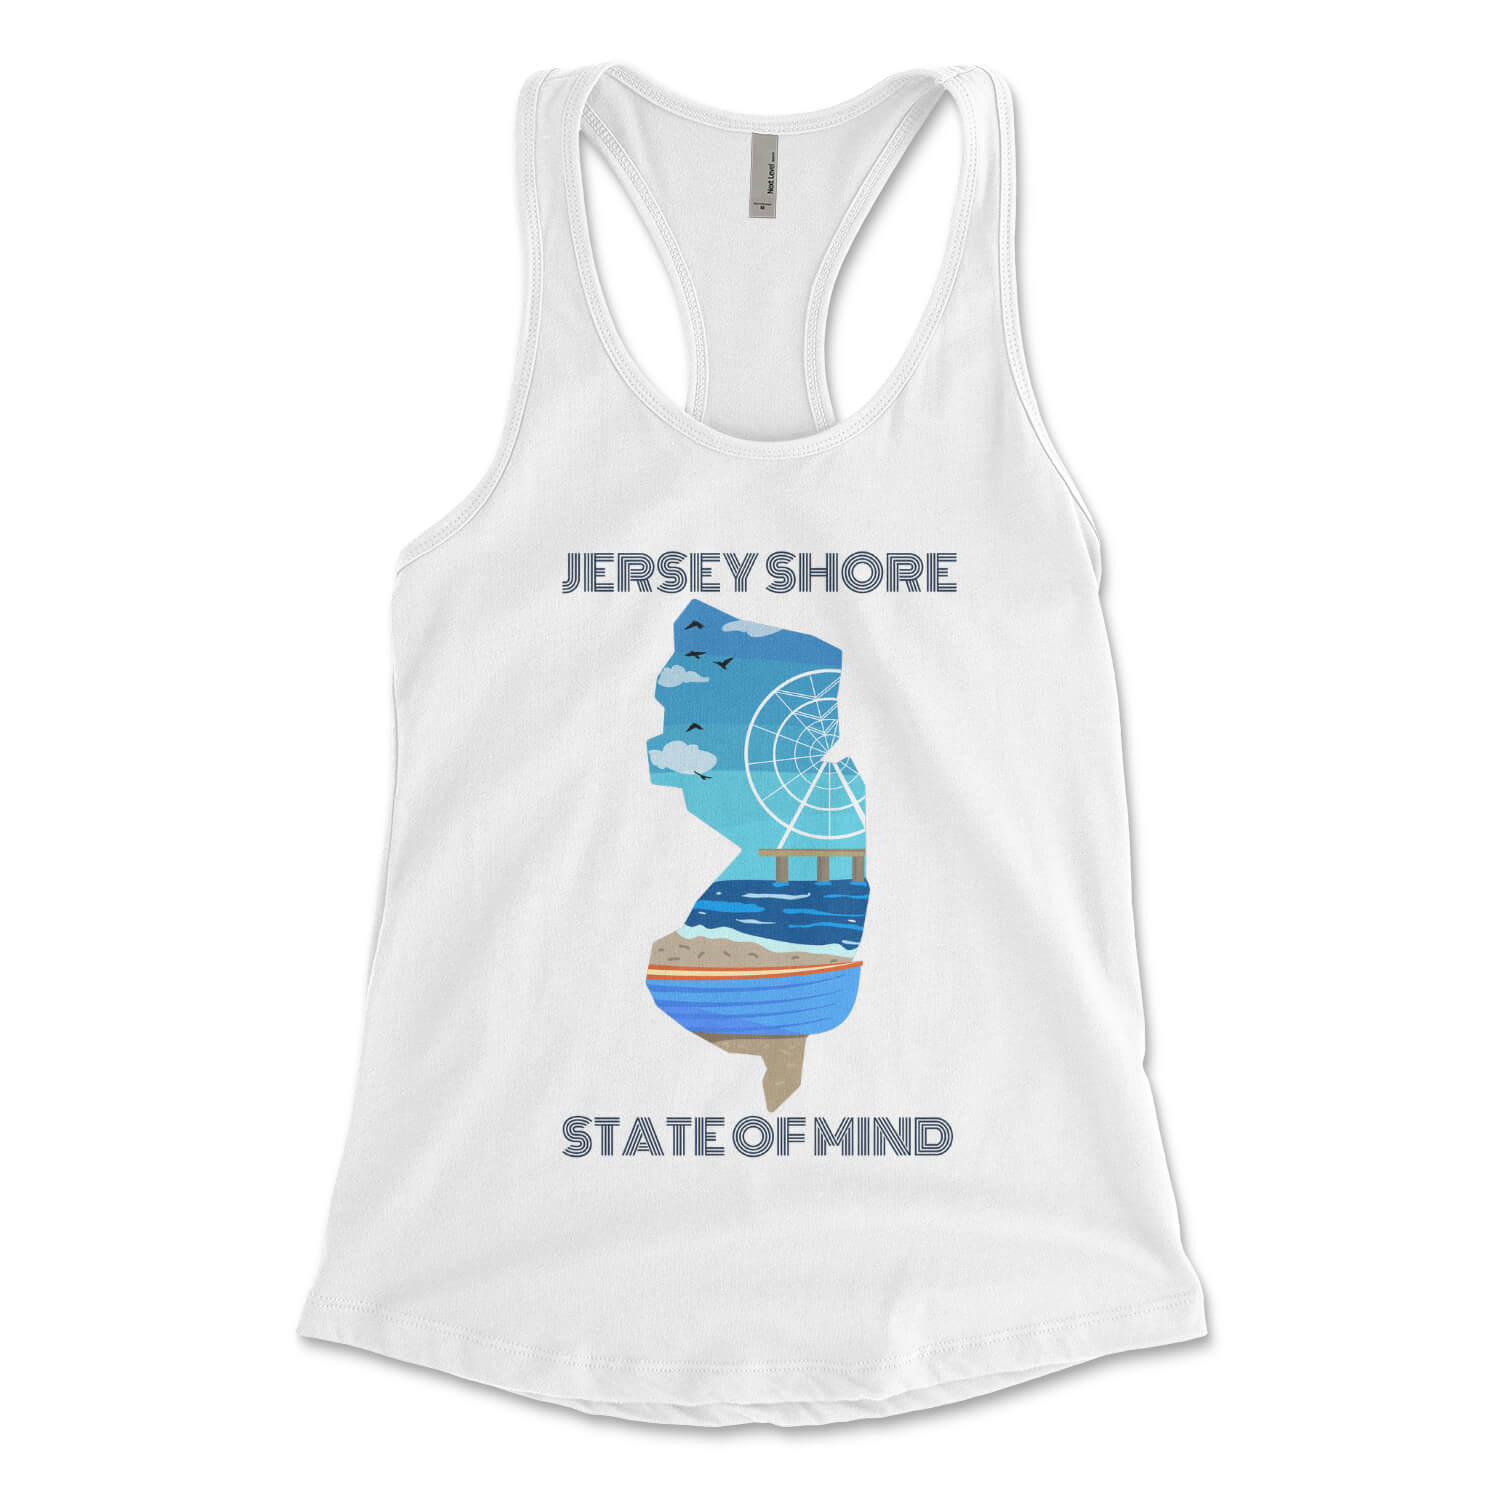 Jersey Shore state of mind white womens racerback tank top from Phillygoat